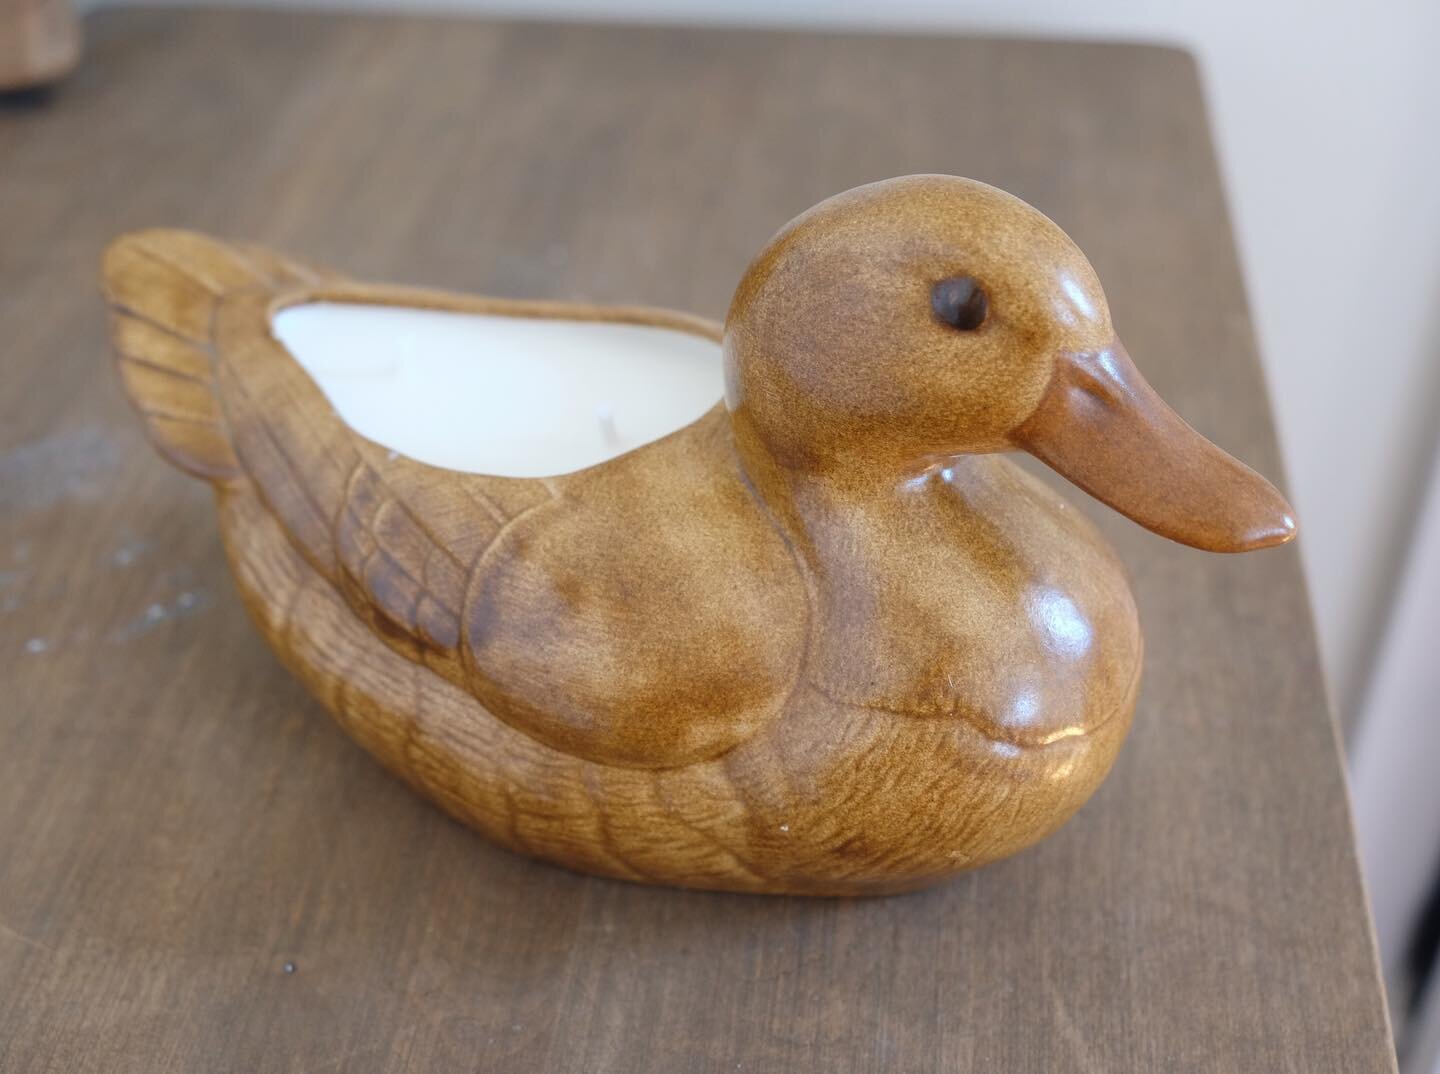 SOLD OUT - brown ceramic duck planter turned candle! Almost like wood! $30 plus shipping - comment SOLD to claim.